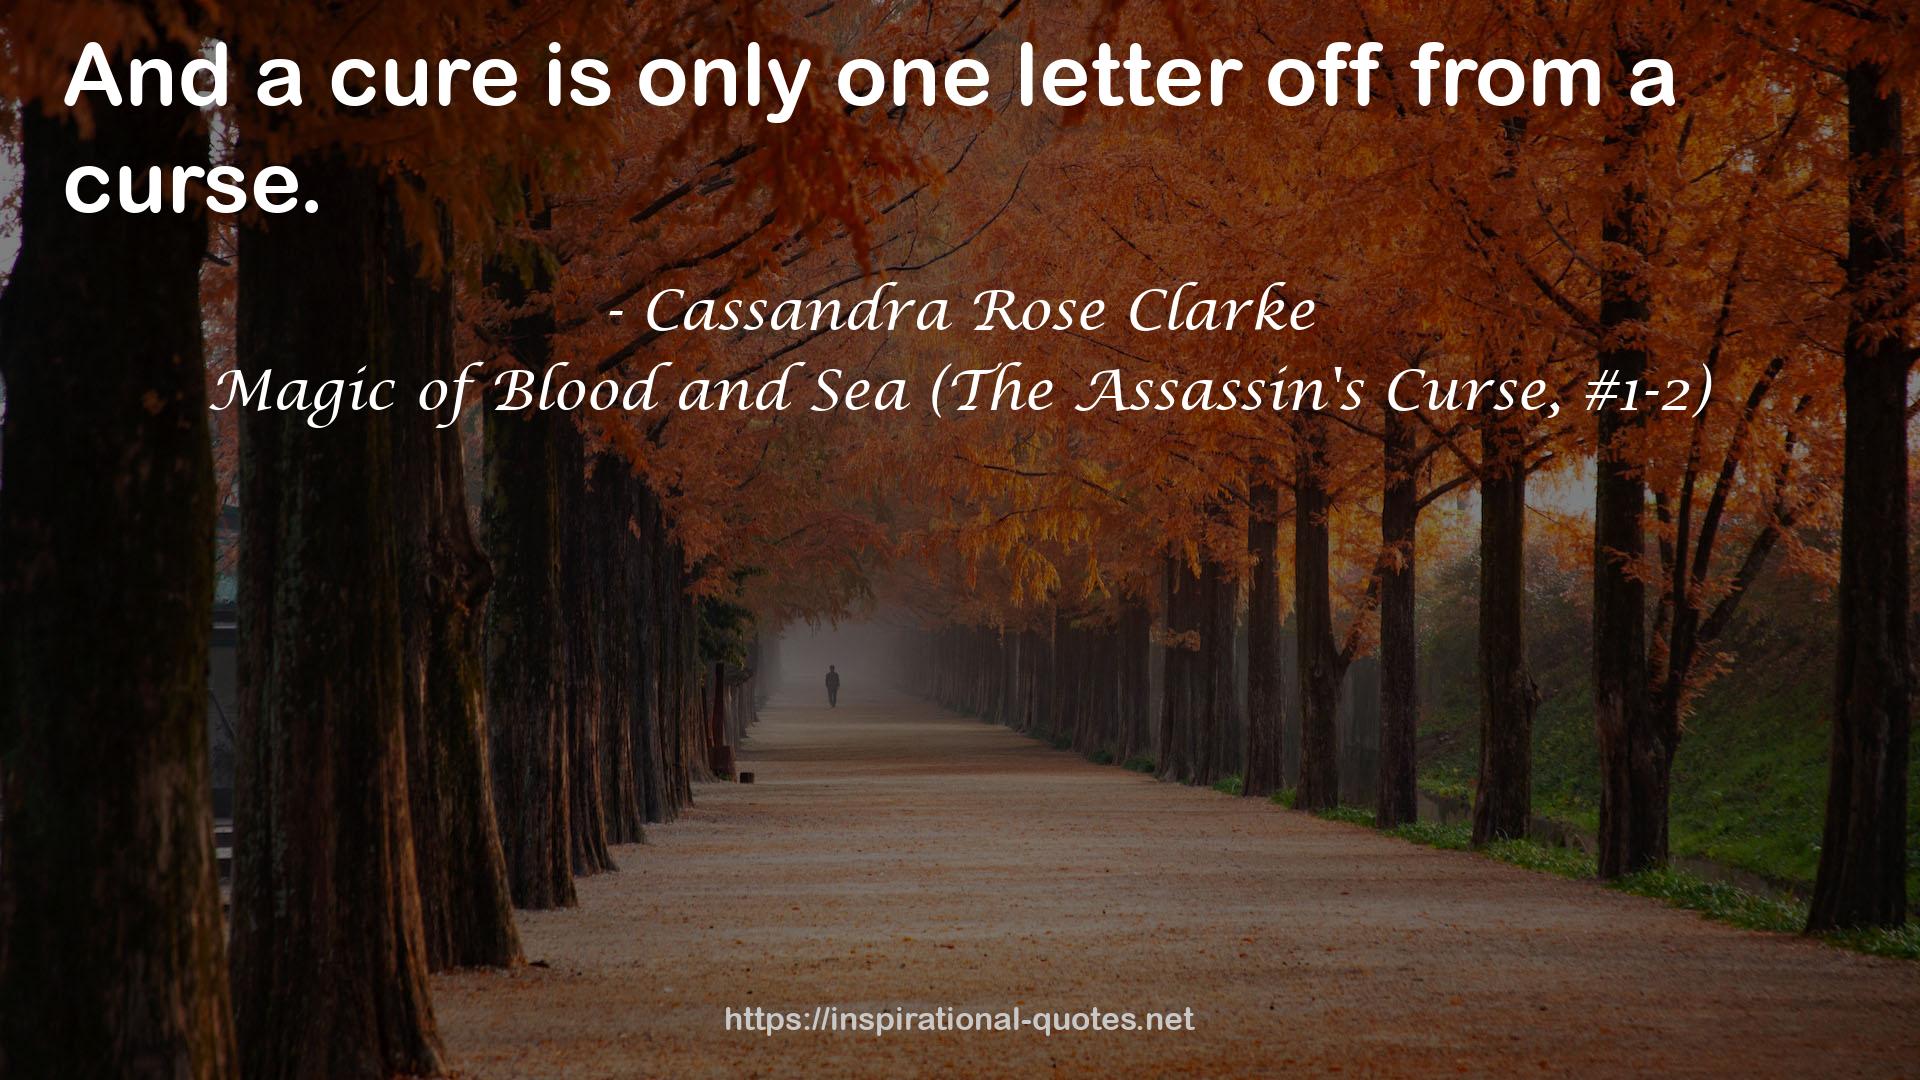 Magic of Blood and Sea (The Assassin's Curse, #1-2) QUOTES